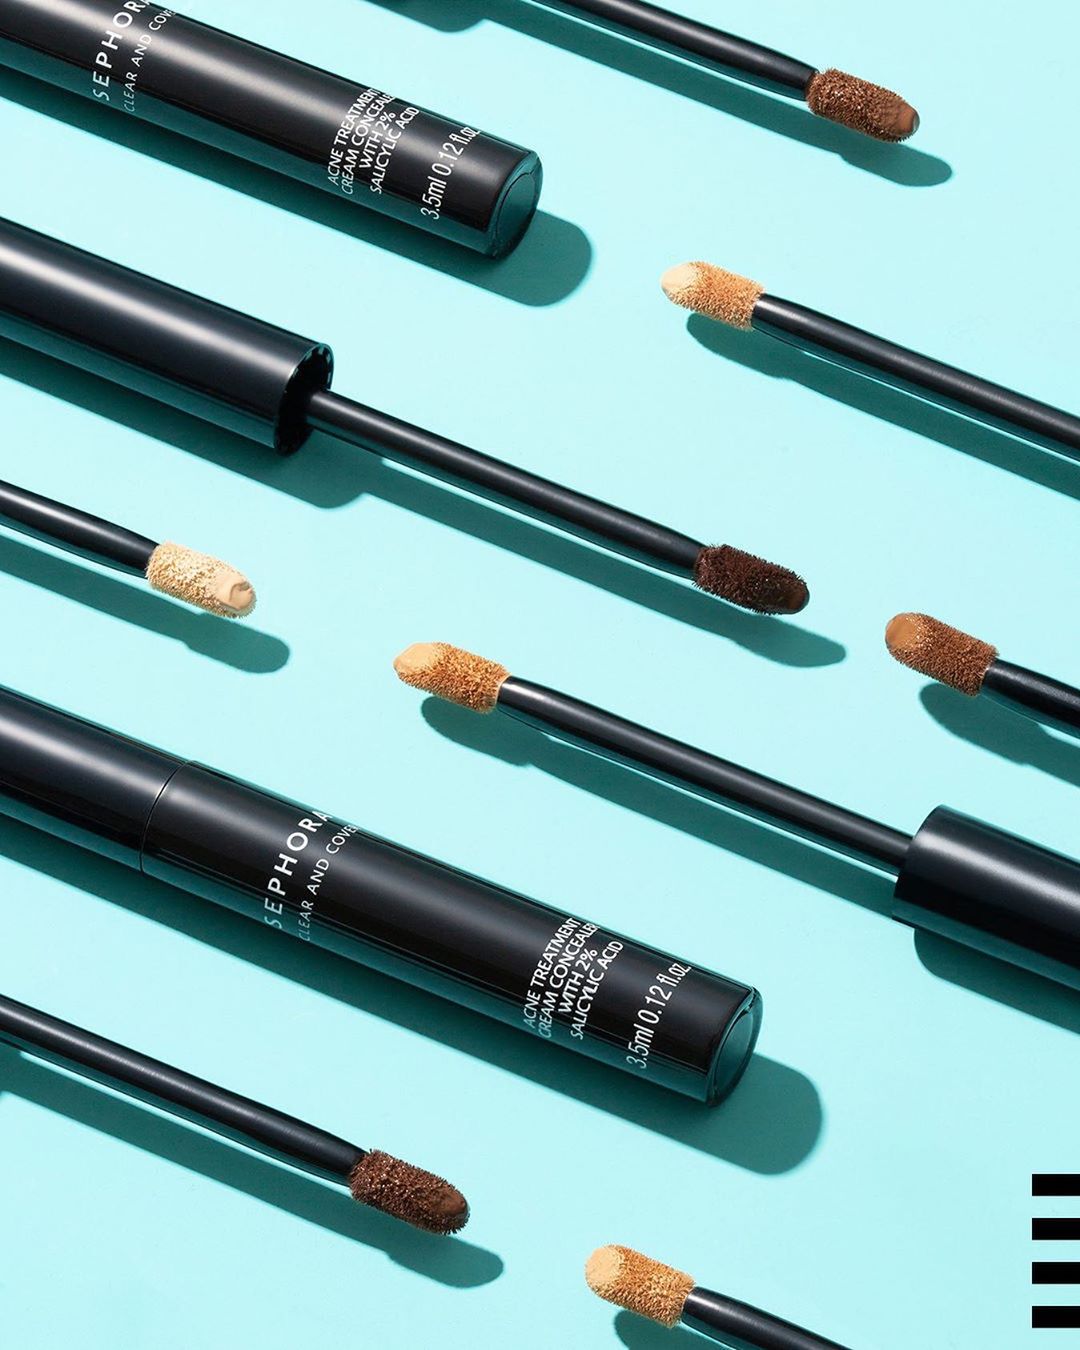 7 New Concealers That Will Replace Your Foundation This Summer